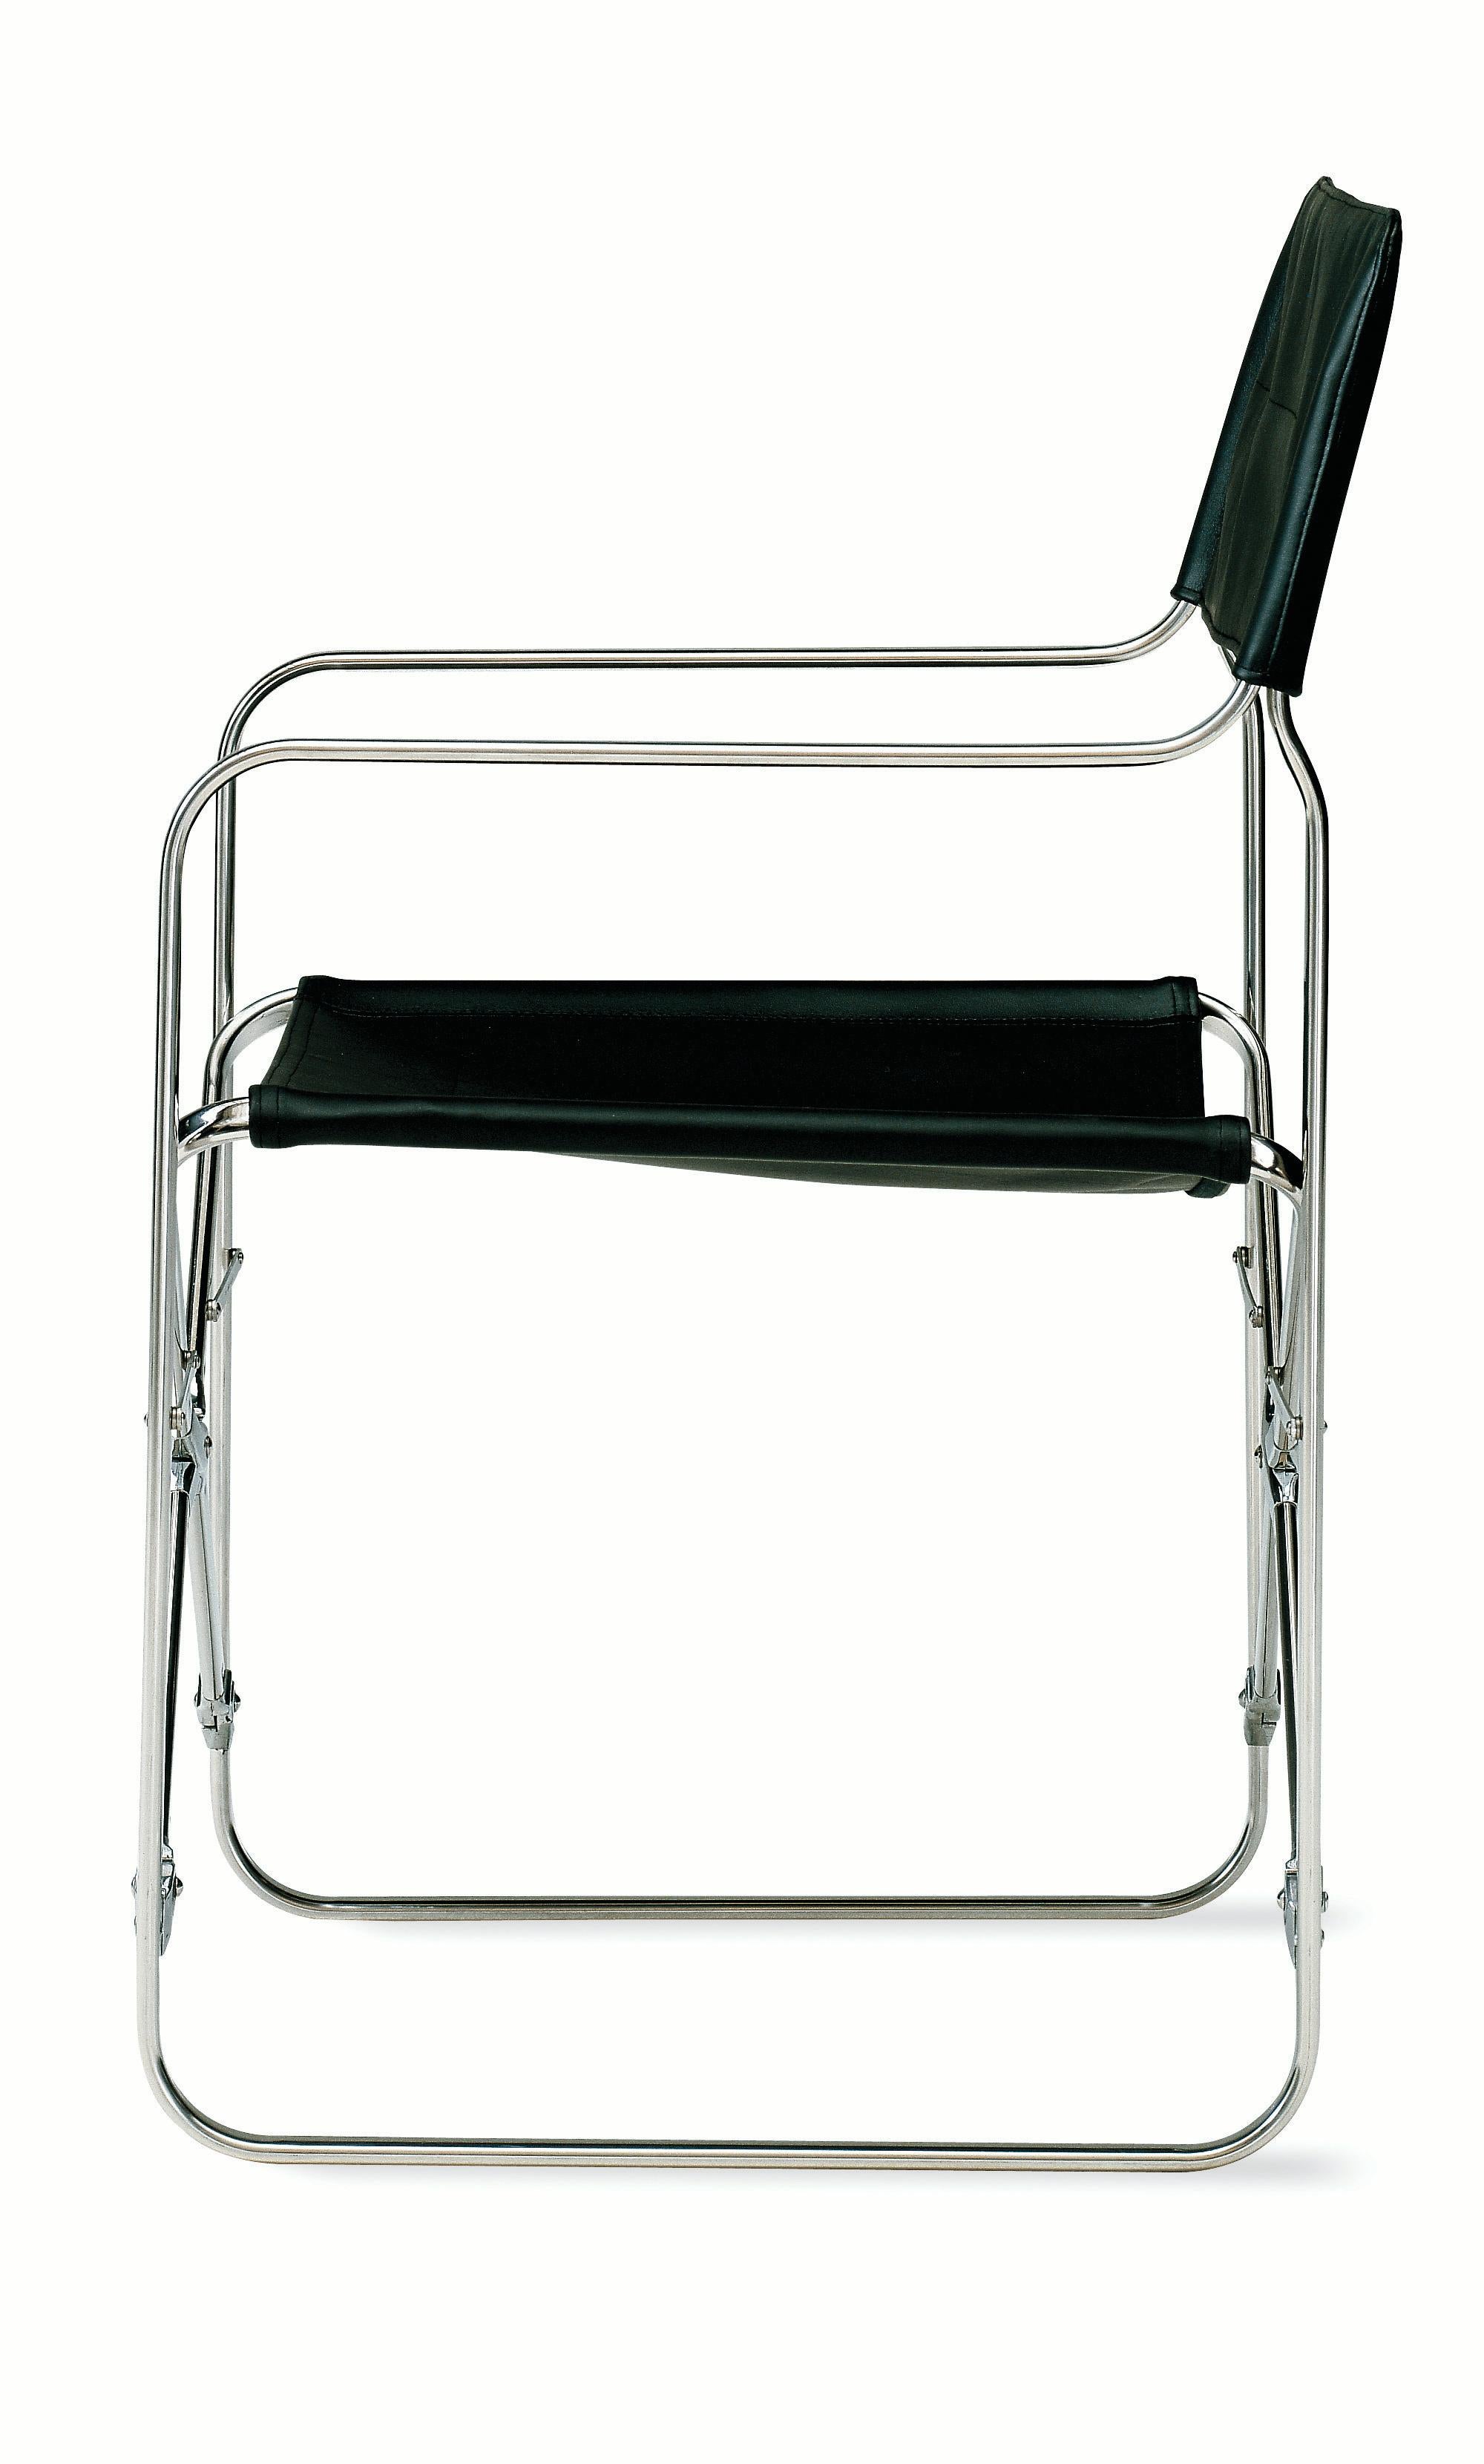 Zanotta April Folding Chair in VIP Seat and Stainless Steel Frame by Gae Aulenti

Folding chair. Frame in black or white painted steel. Nylon seat and back covered in cowhide 95.

Additional Information:
Material: Steel, nylon
Upholstery